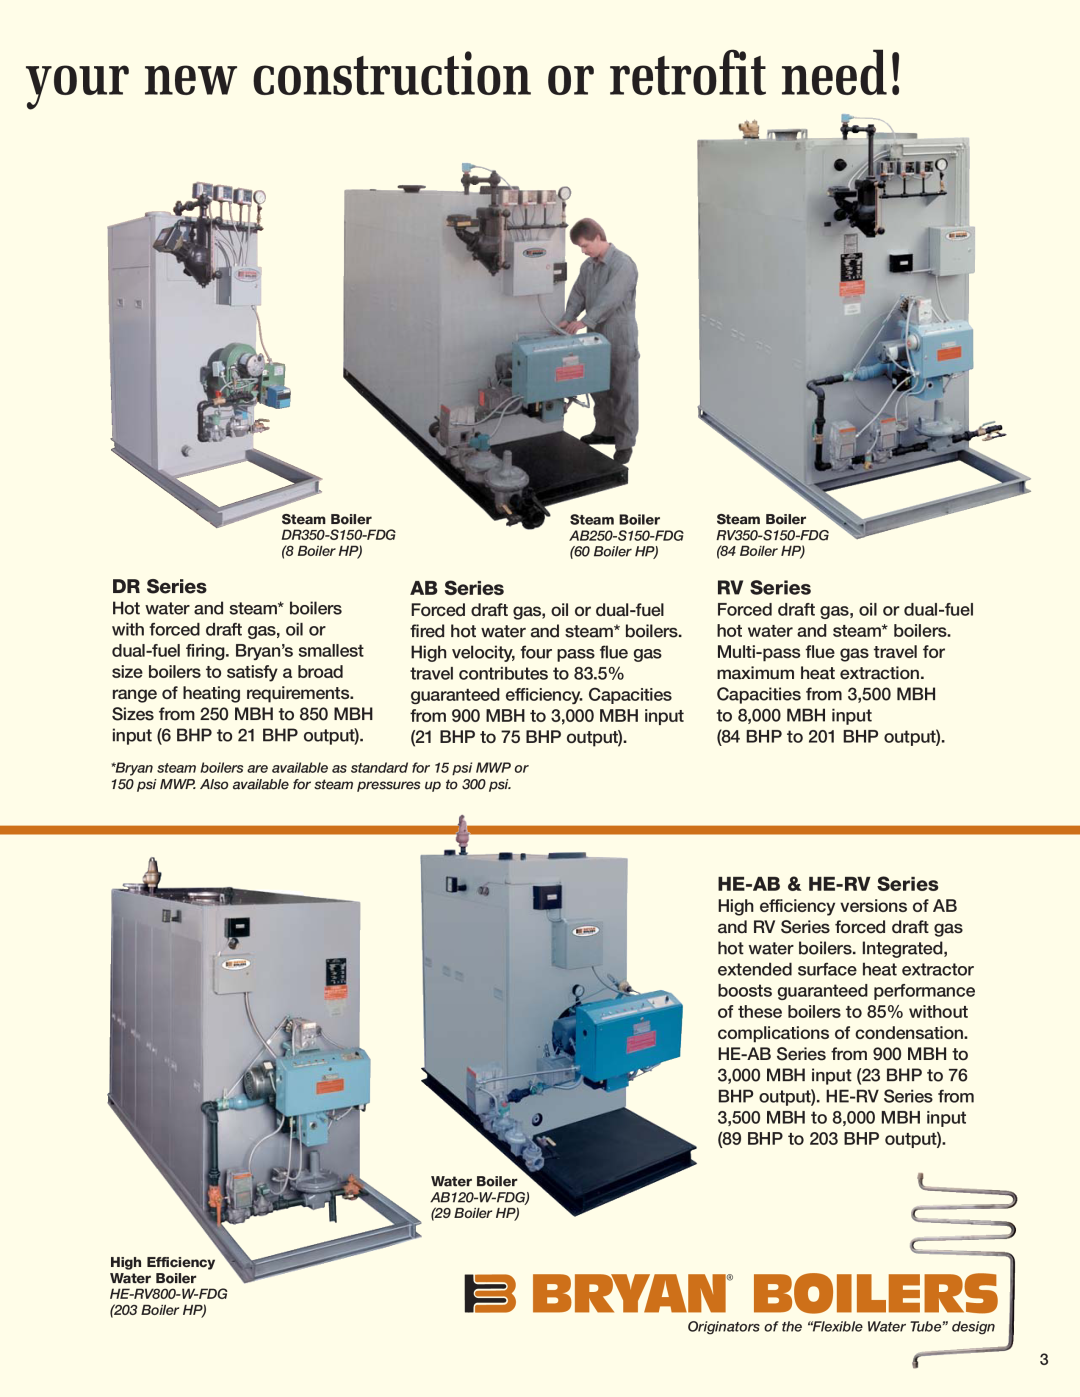 Bryan Boilers Flexible Water Tube Boilers manual your new construction or retrofit need, DR Series, AB Series, RV Series 